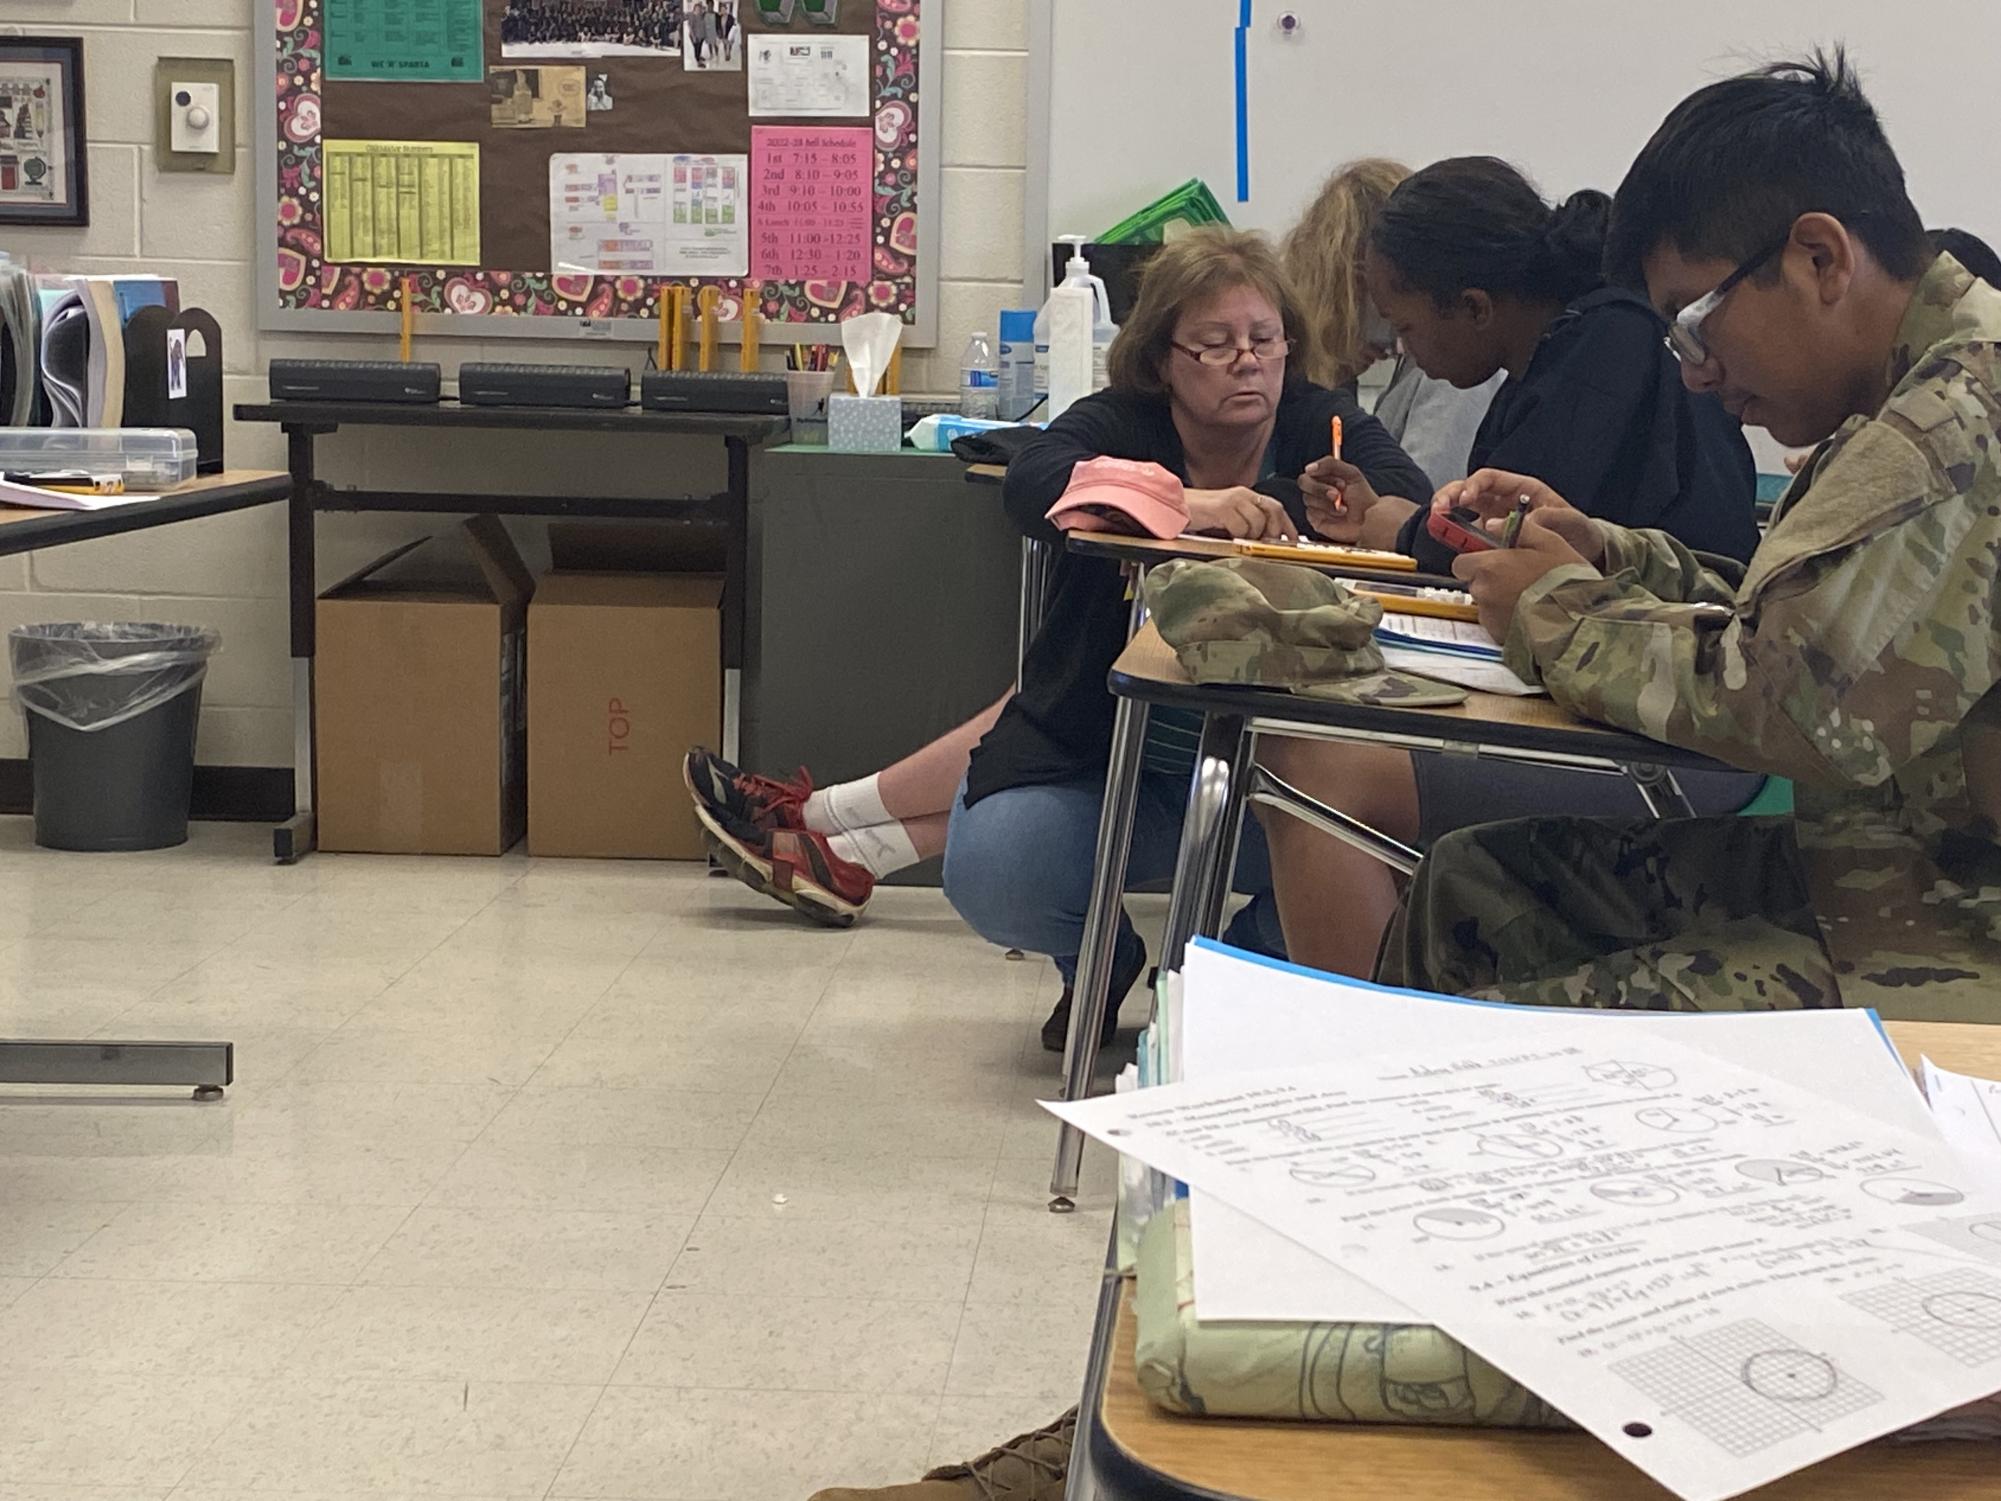 Teacher Poppy Underwood kneels to help students understand their work. She helped the students review circle formulas for their upcoming test.
